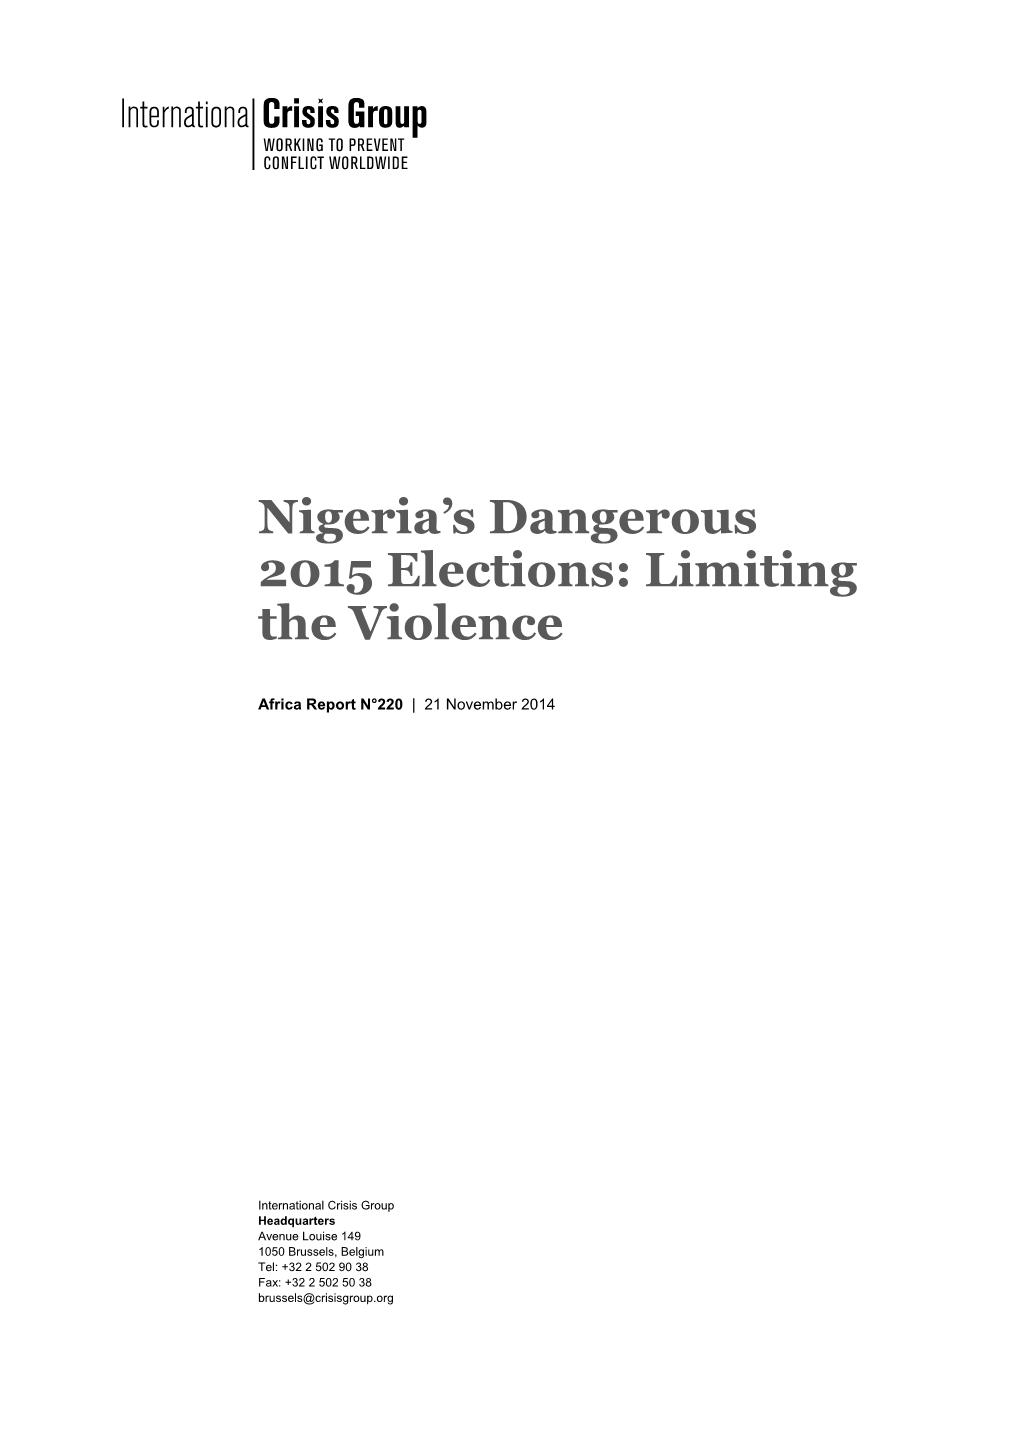 Nigeria's Dangerous 2015 Elections: Limiting the Violence